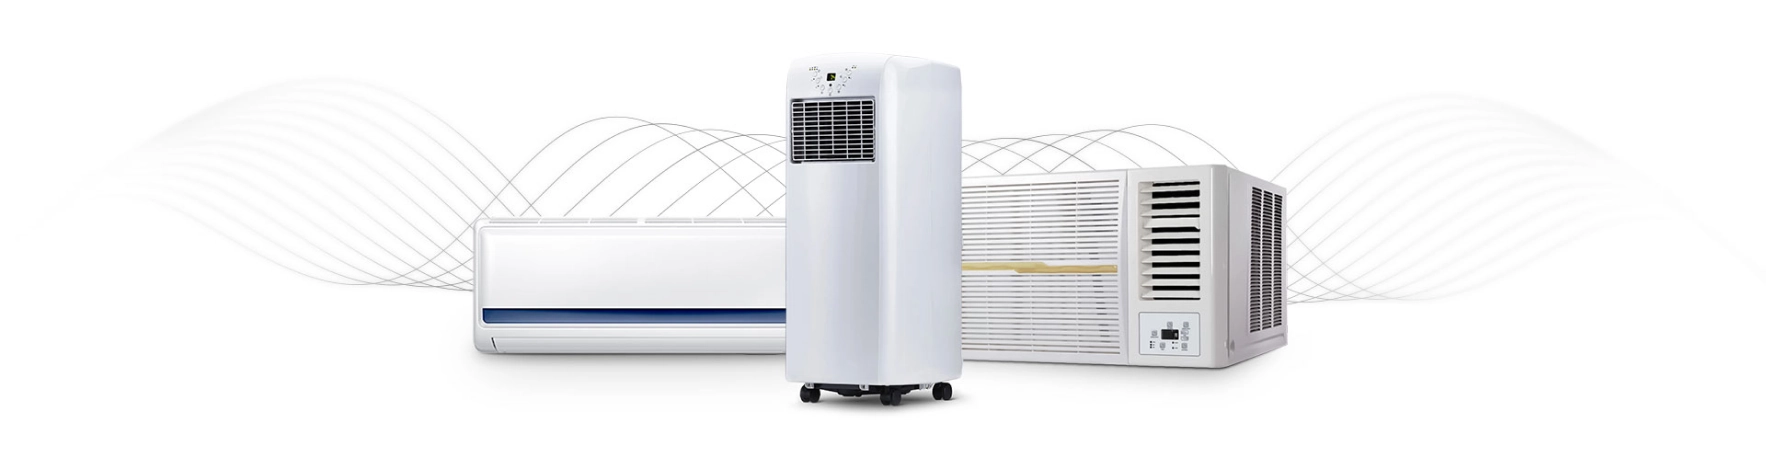 Room air conditioners - mini-split, window and portable ACs